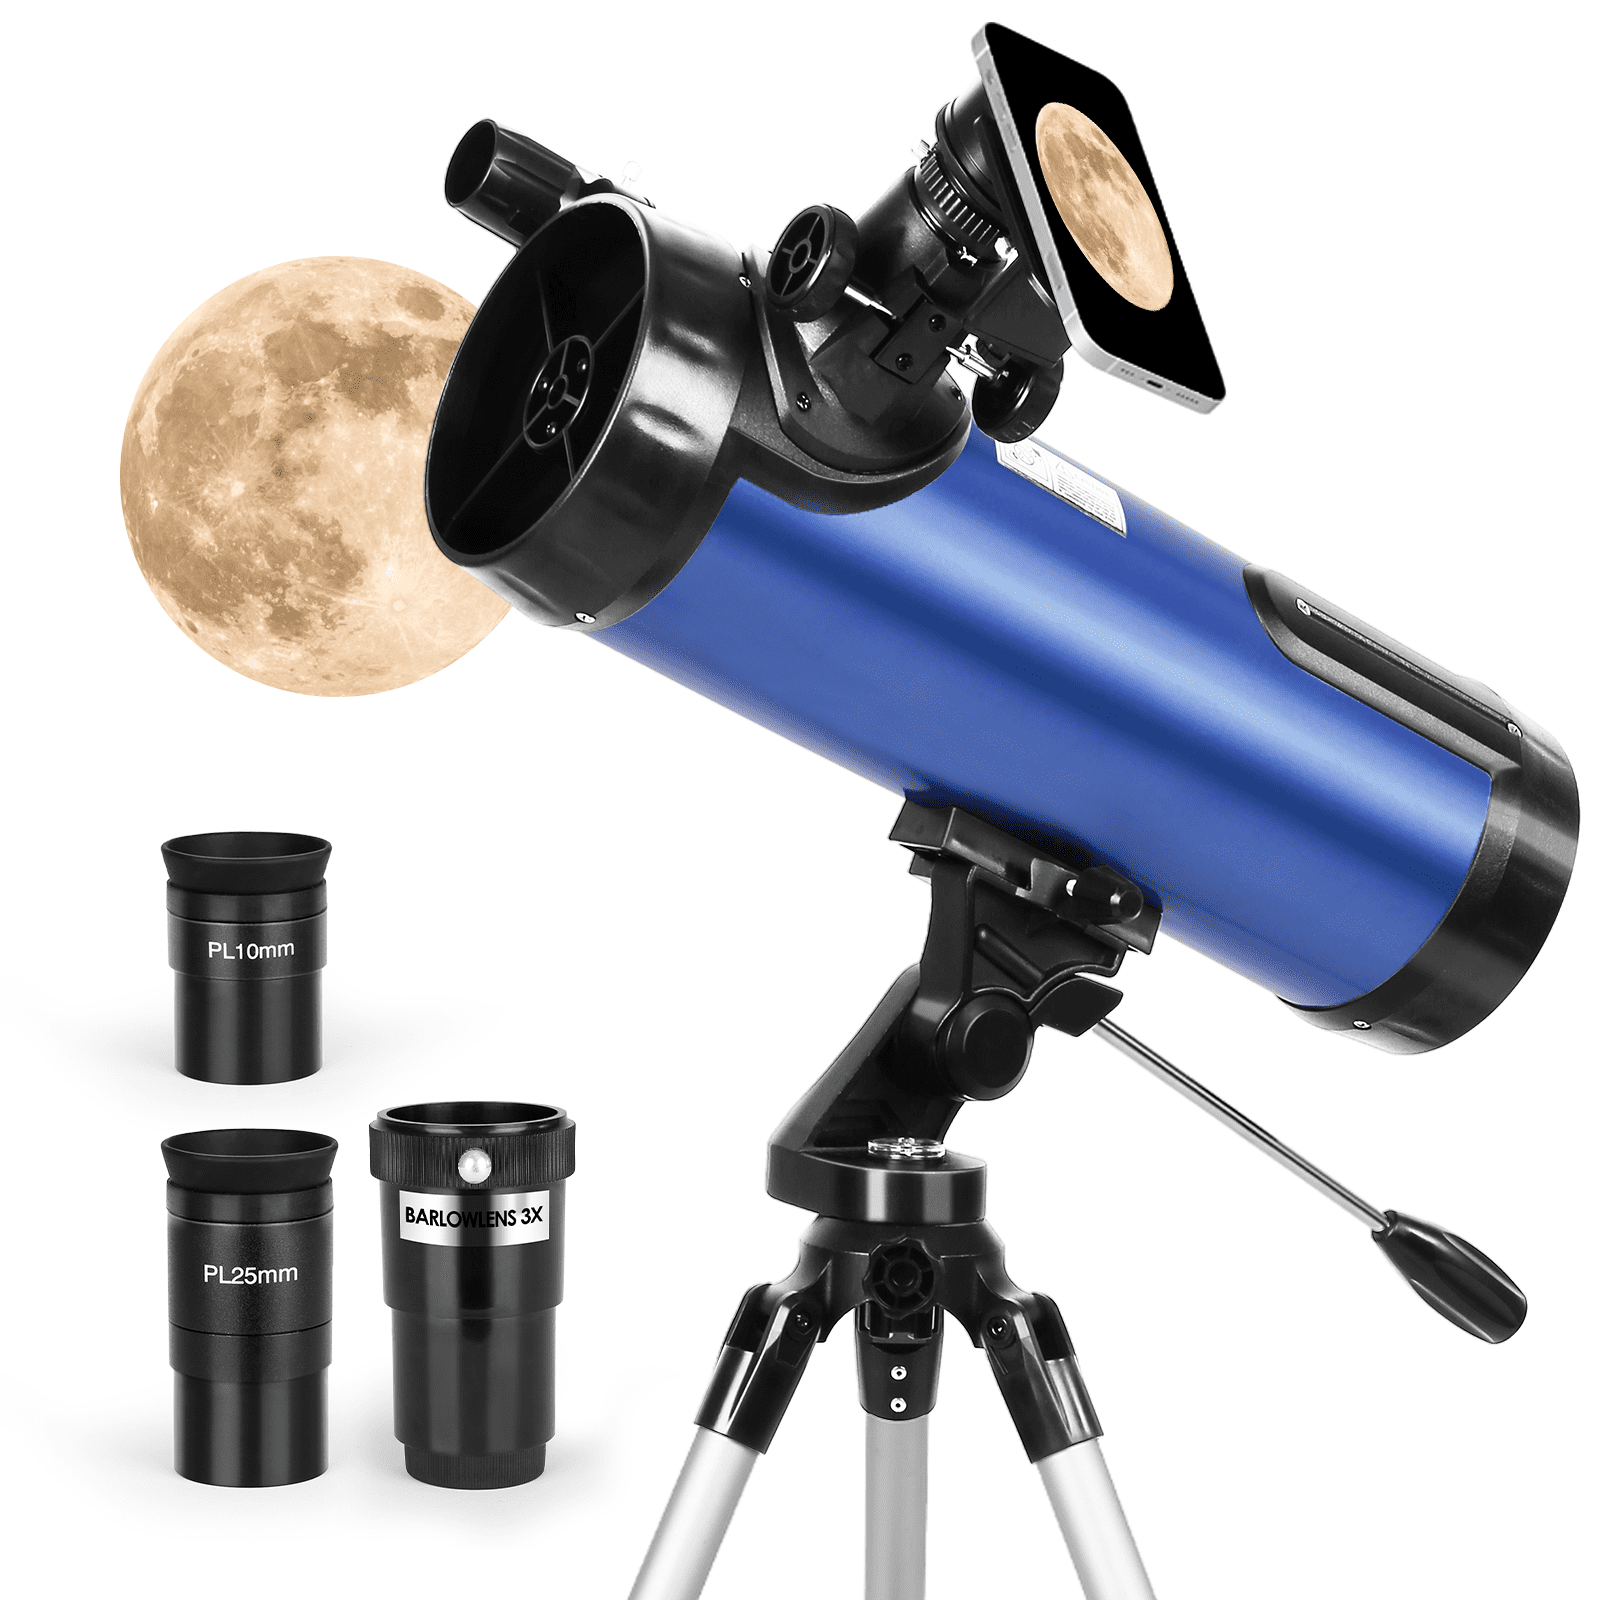 60mm Aperture 500mm AZ Mount Telescopes for Astronomy Beginners Refractor Telescope with Adjustable Tripod and Phone Adapter Telescopes for Adults 